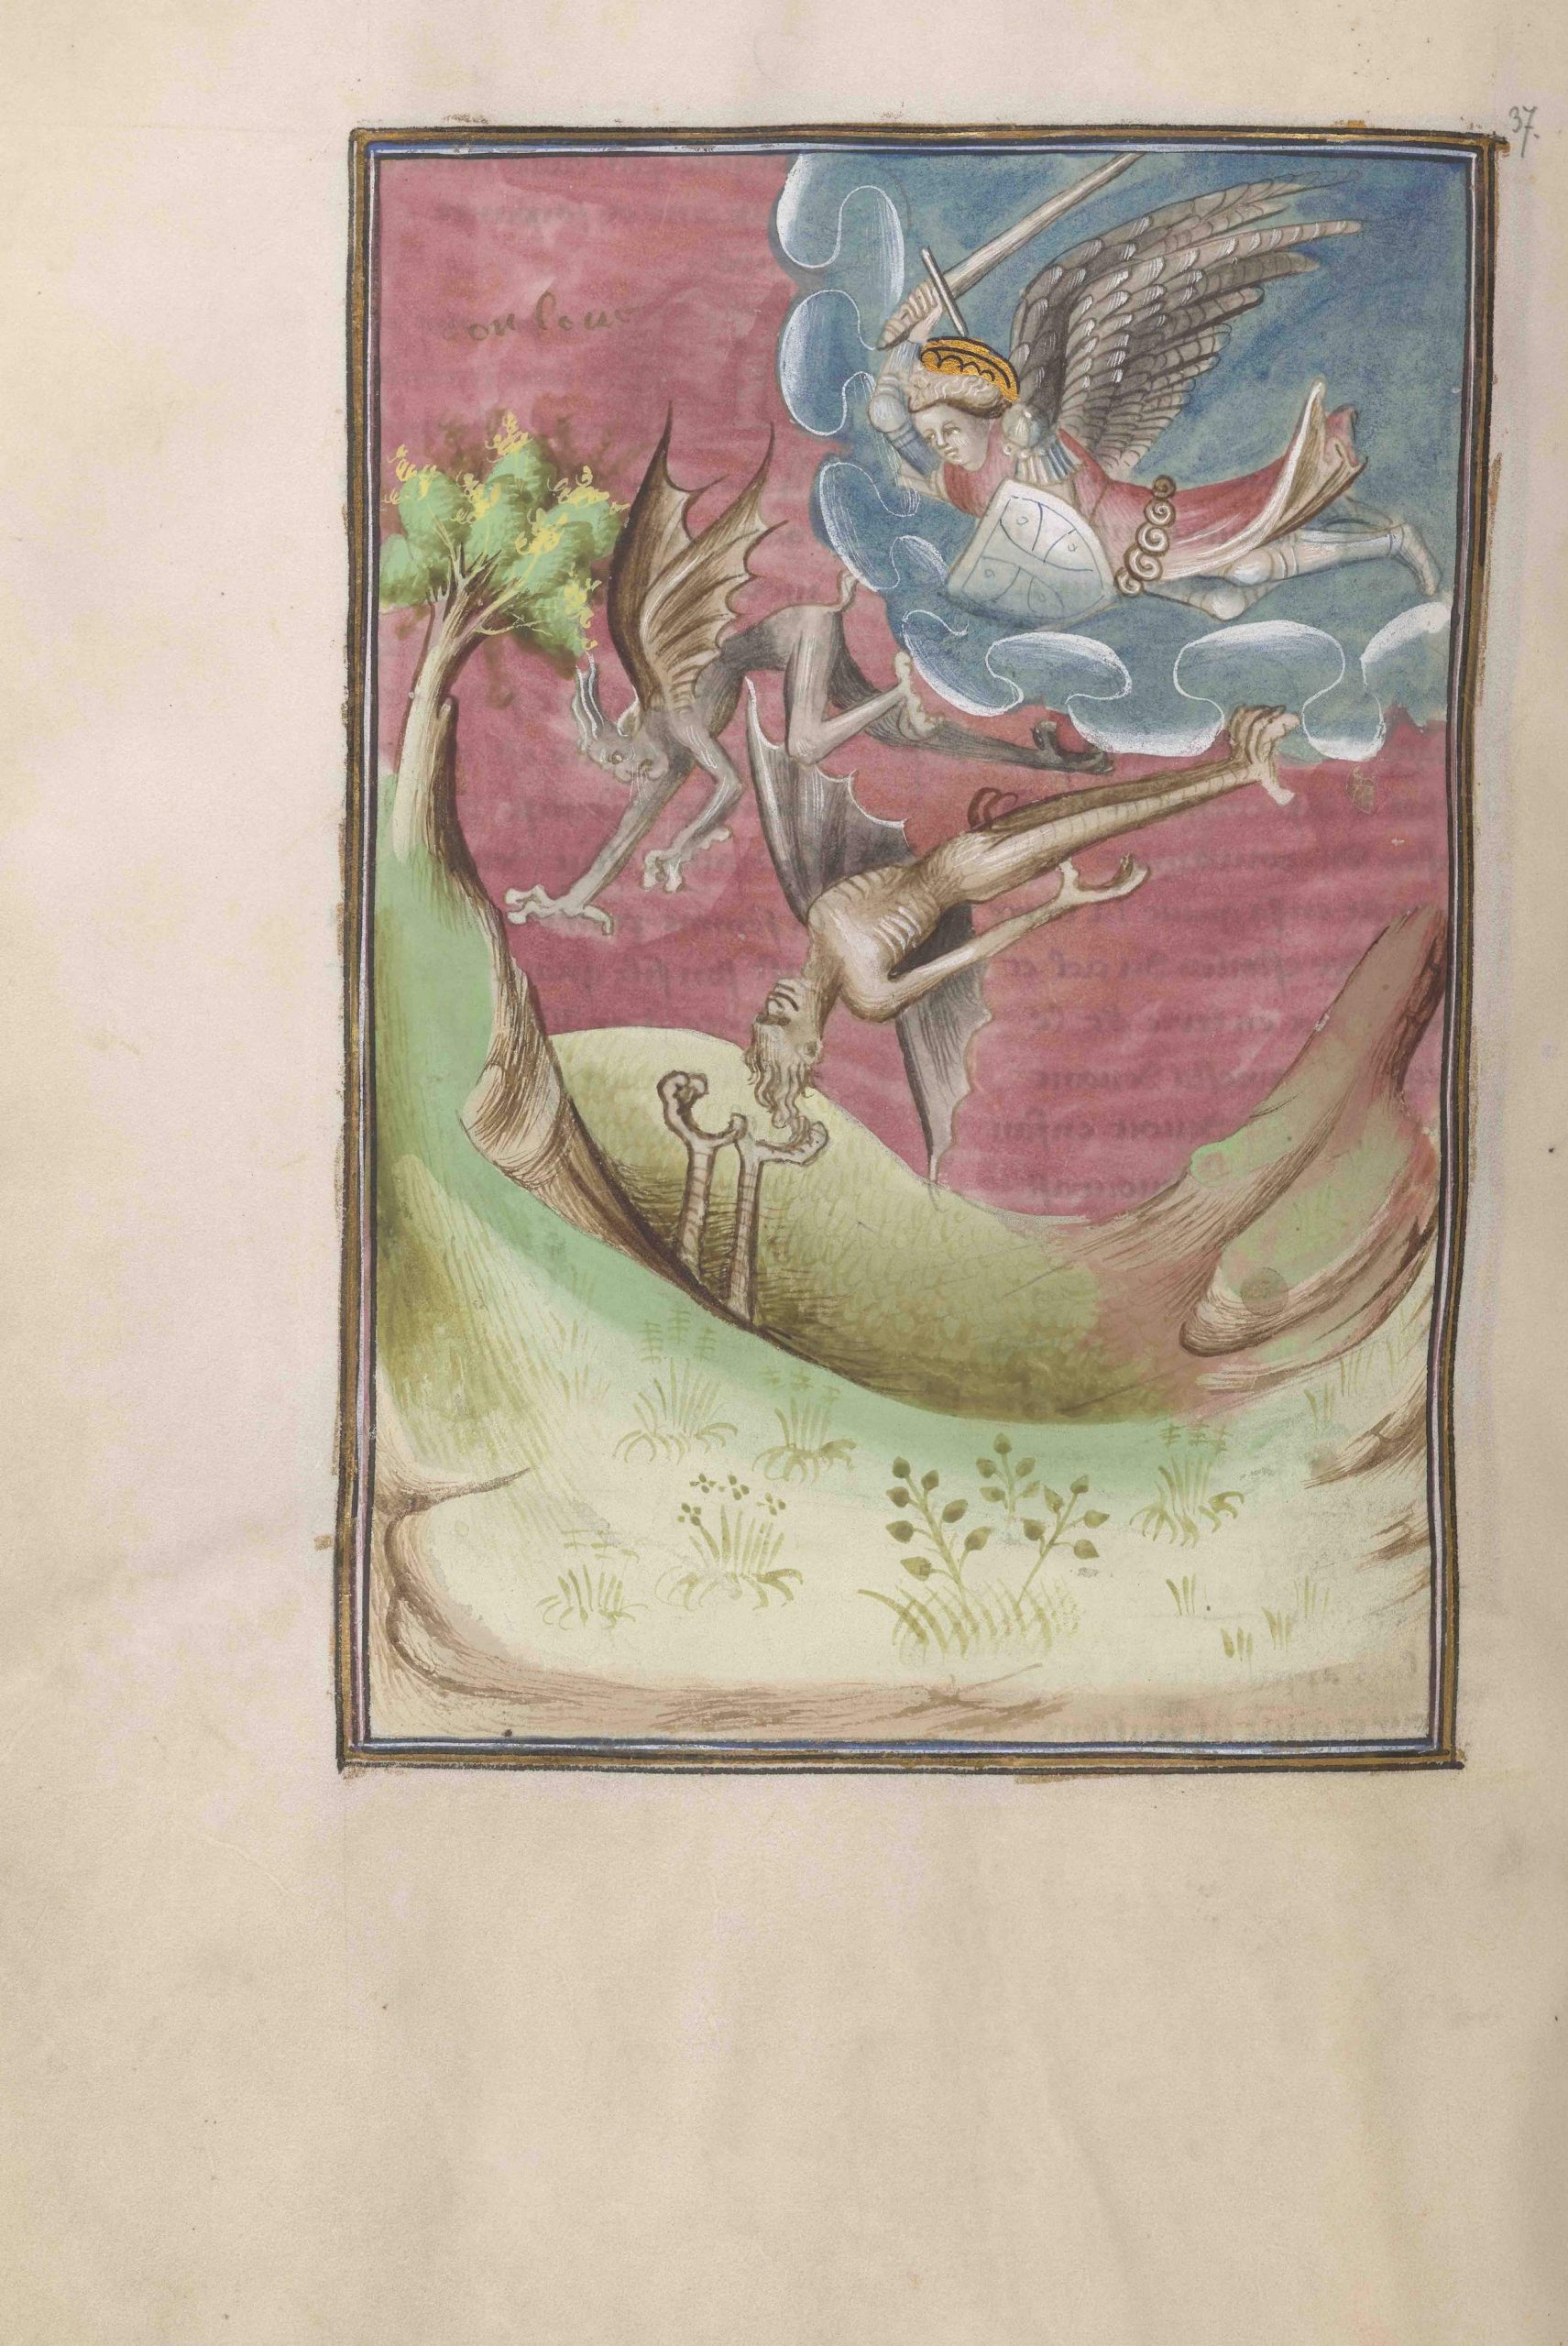 Folio 37 verso showing archangel Michael fighting the devils, from The Morgan Library & Museum in New York, MS M.133; Paris, around 1410